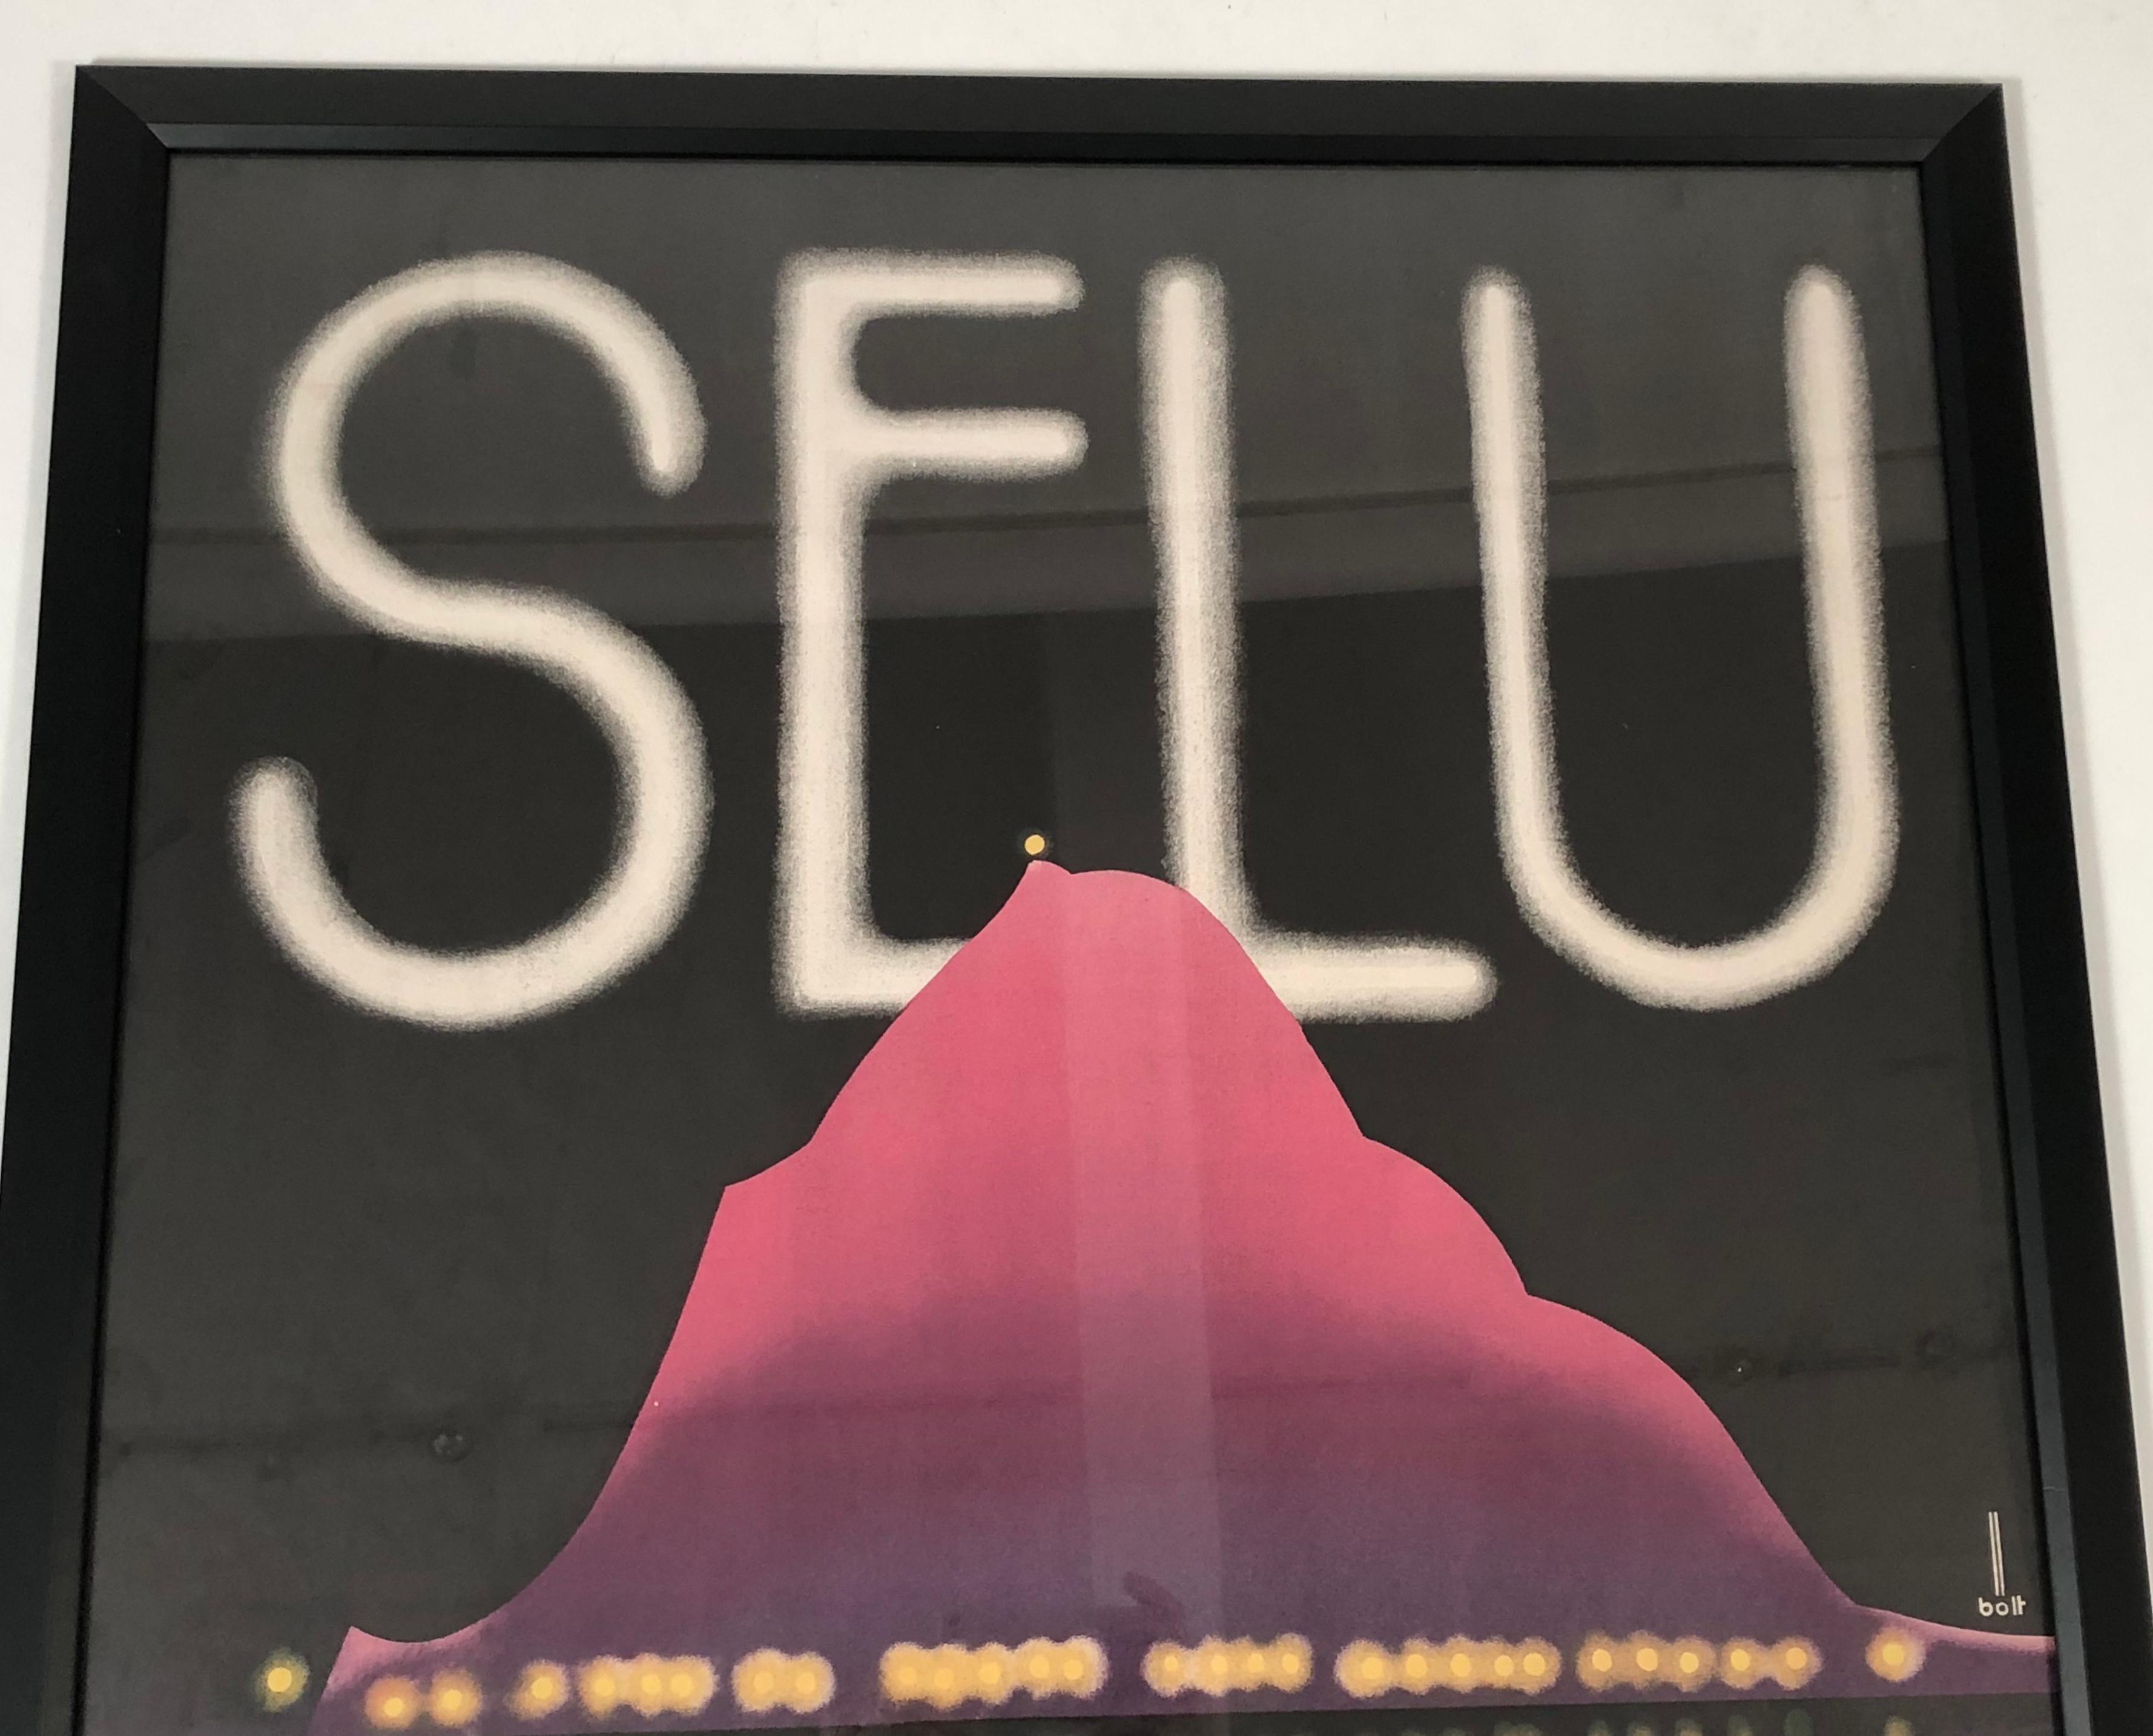 An original 1934 film festival poster advertising SELU, the Semaine de Lumiere (week of light) festival on Lake Lugano, 9-21 May 1934, lithograph on paper by Bolt, depicting a pink mountain, with yellow light at the summit, against a black